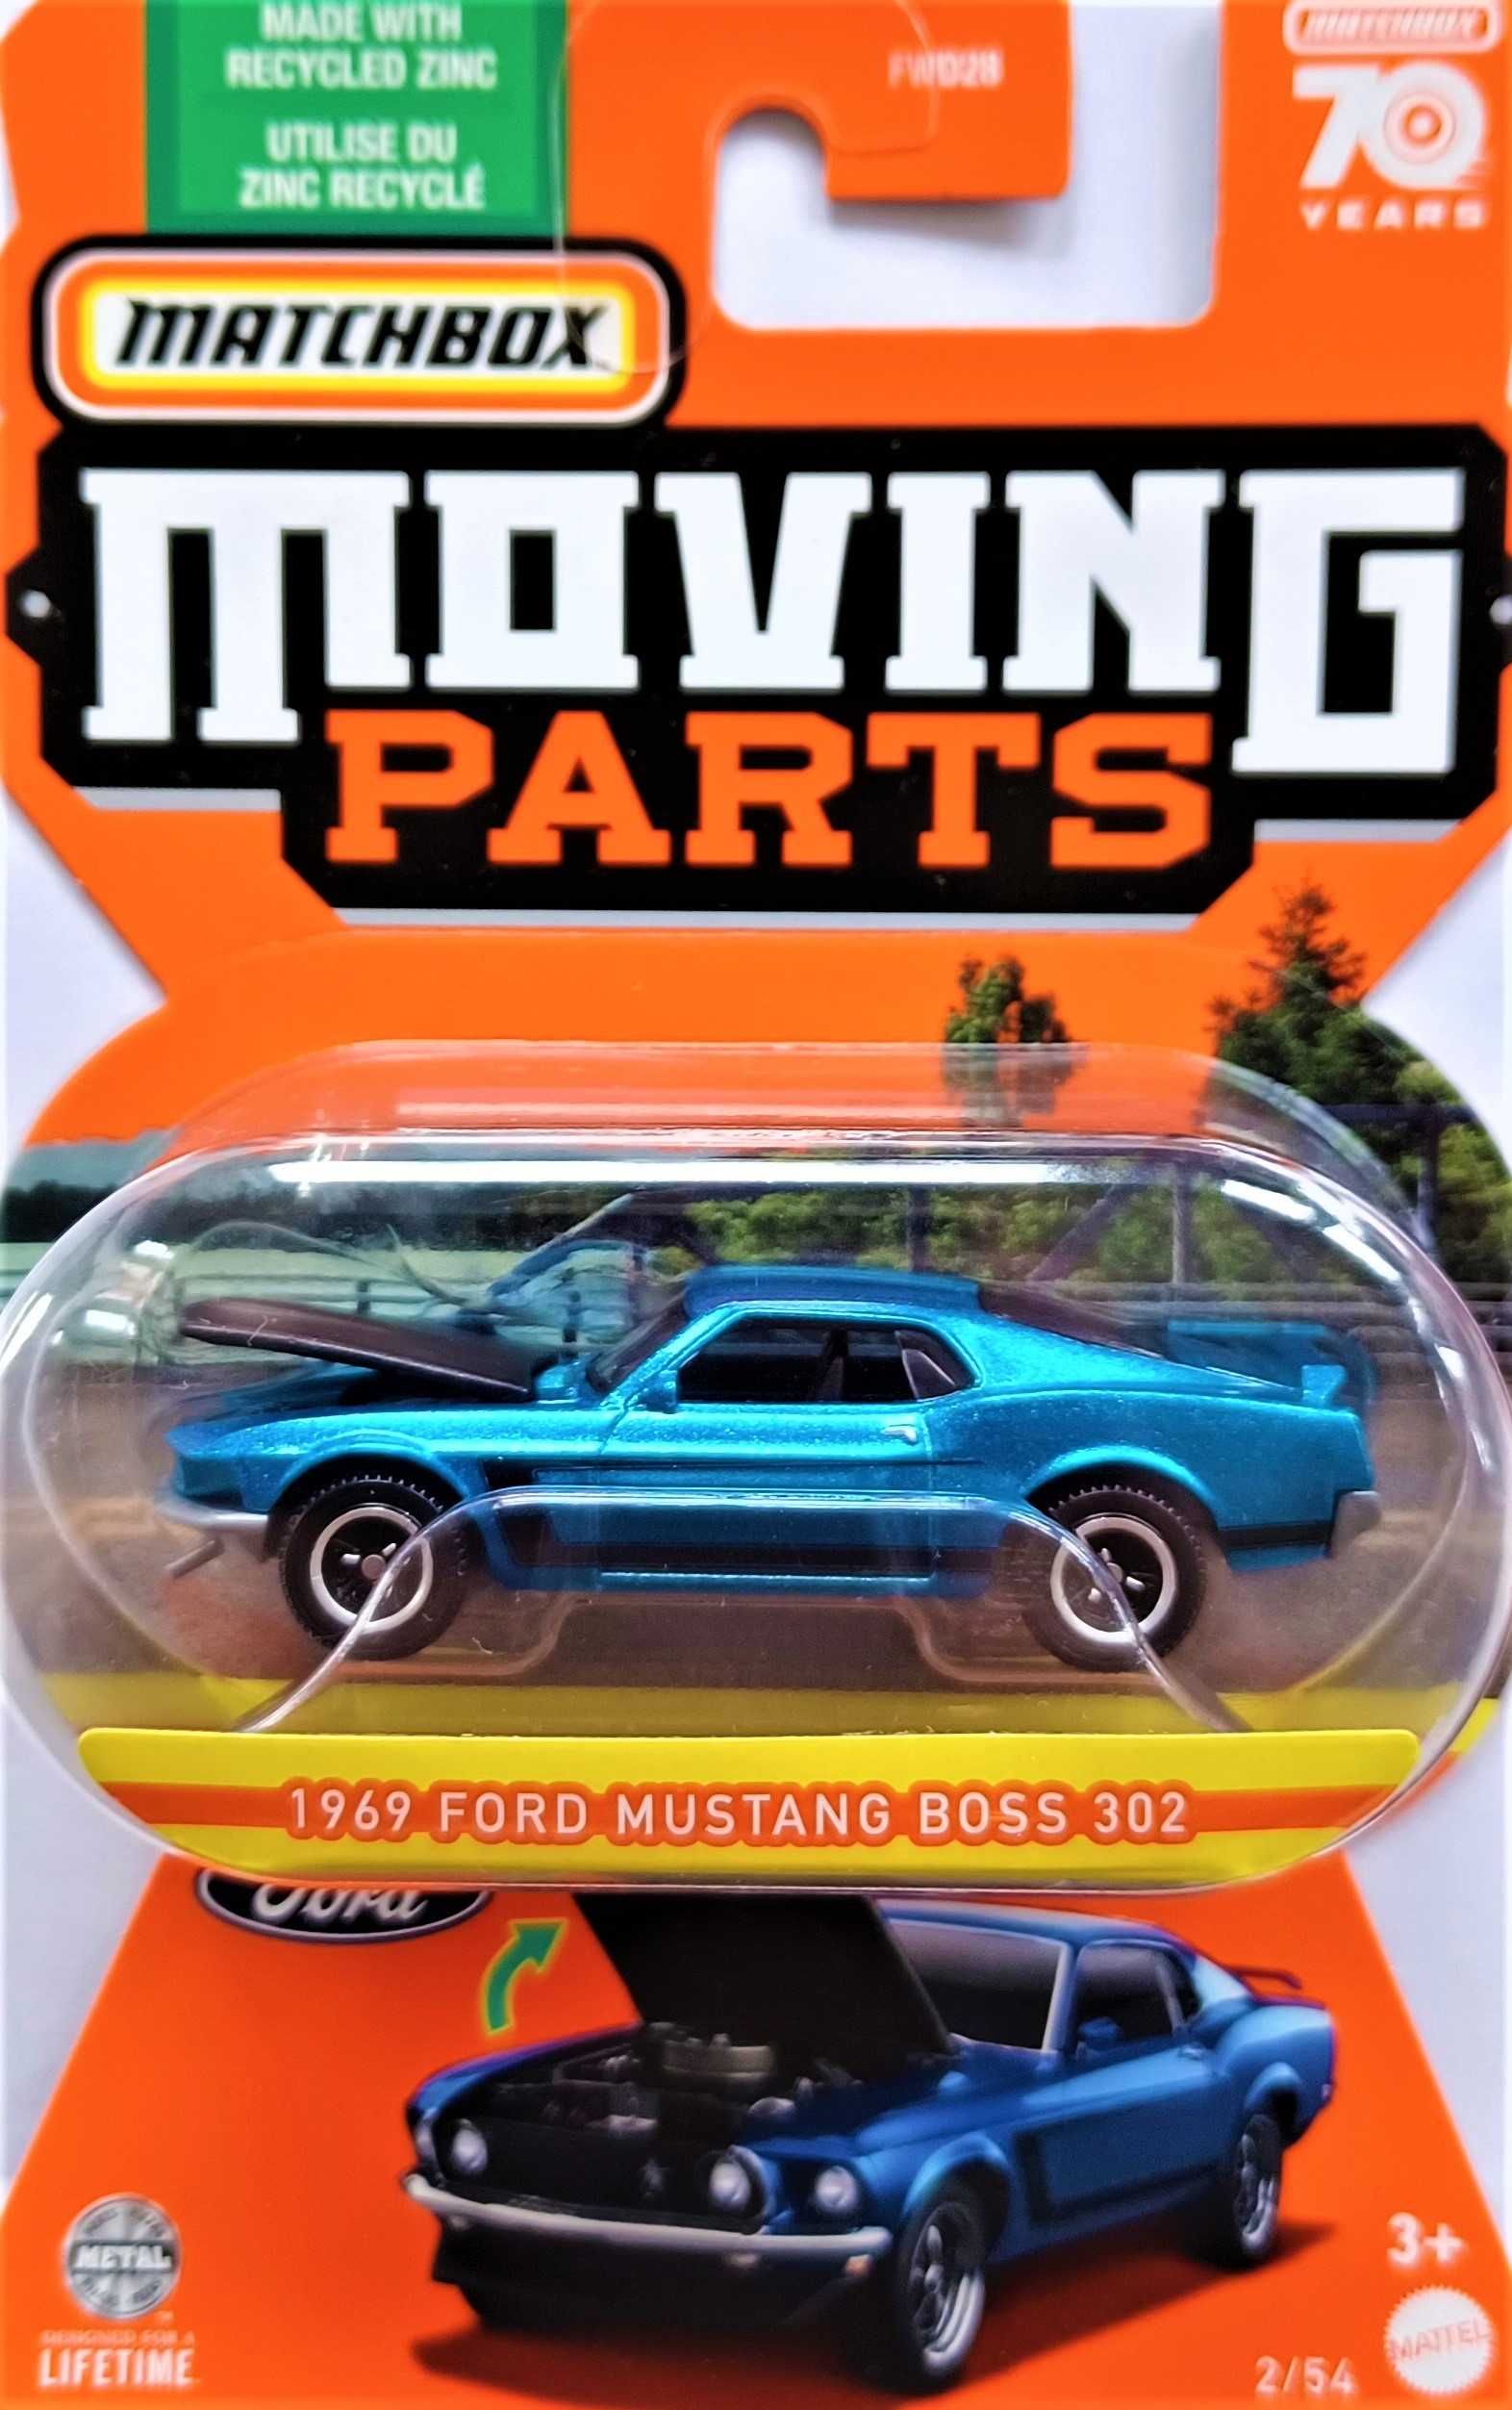 Matchbox 1969 Ford Mustang Boss 302 Moving Parts HLF87